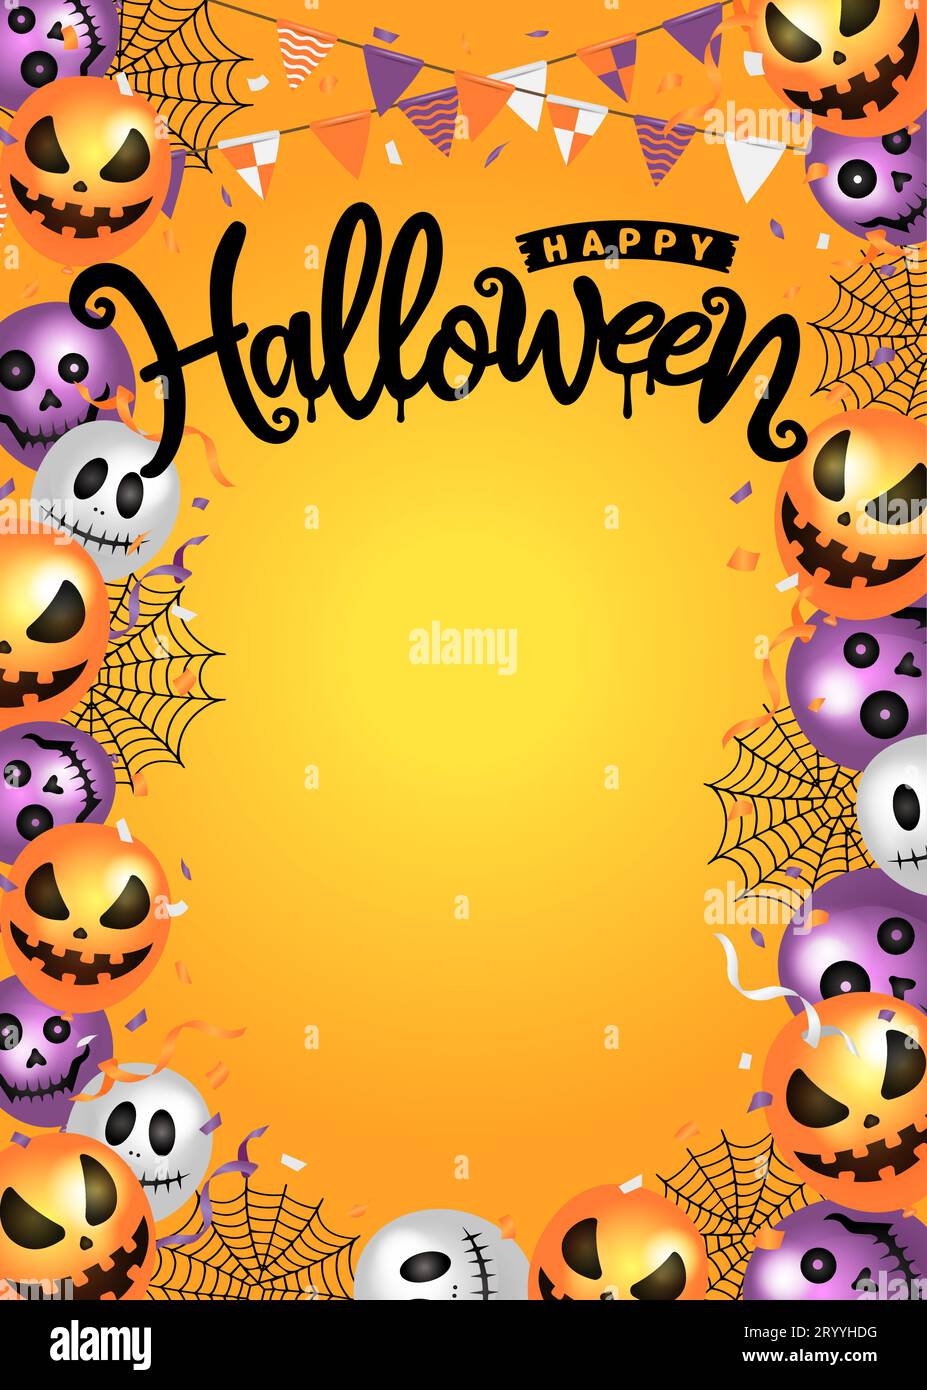 Halloween poster template illustration with balloon motif (A4 size portrait) Stock Vector